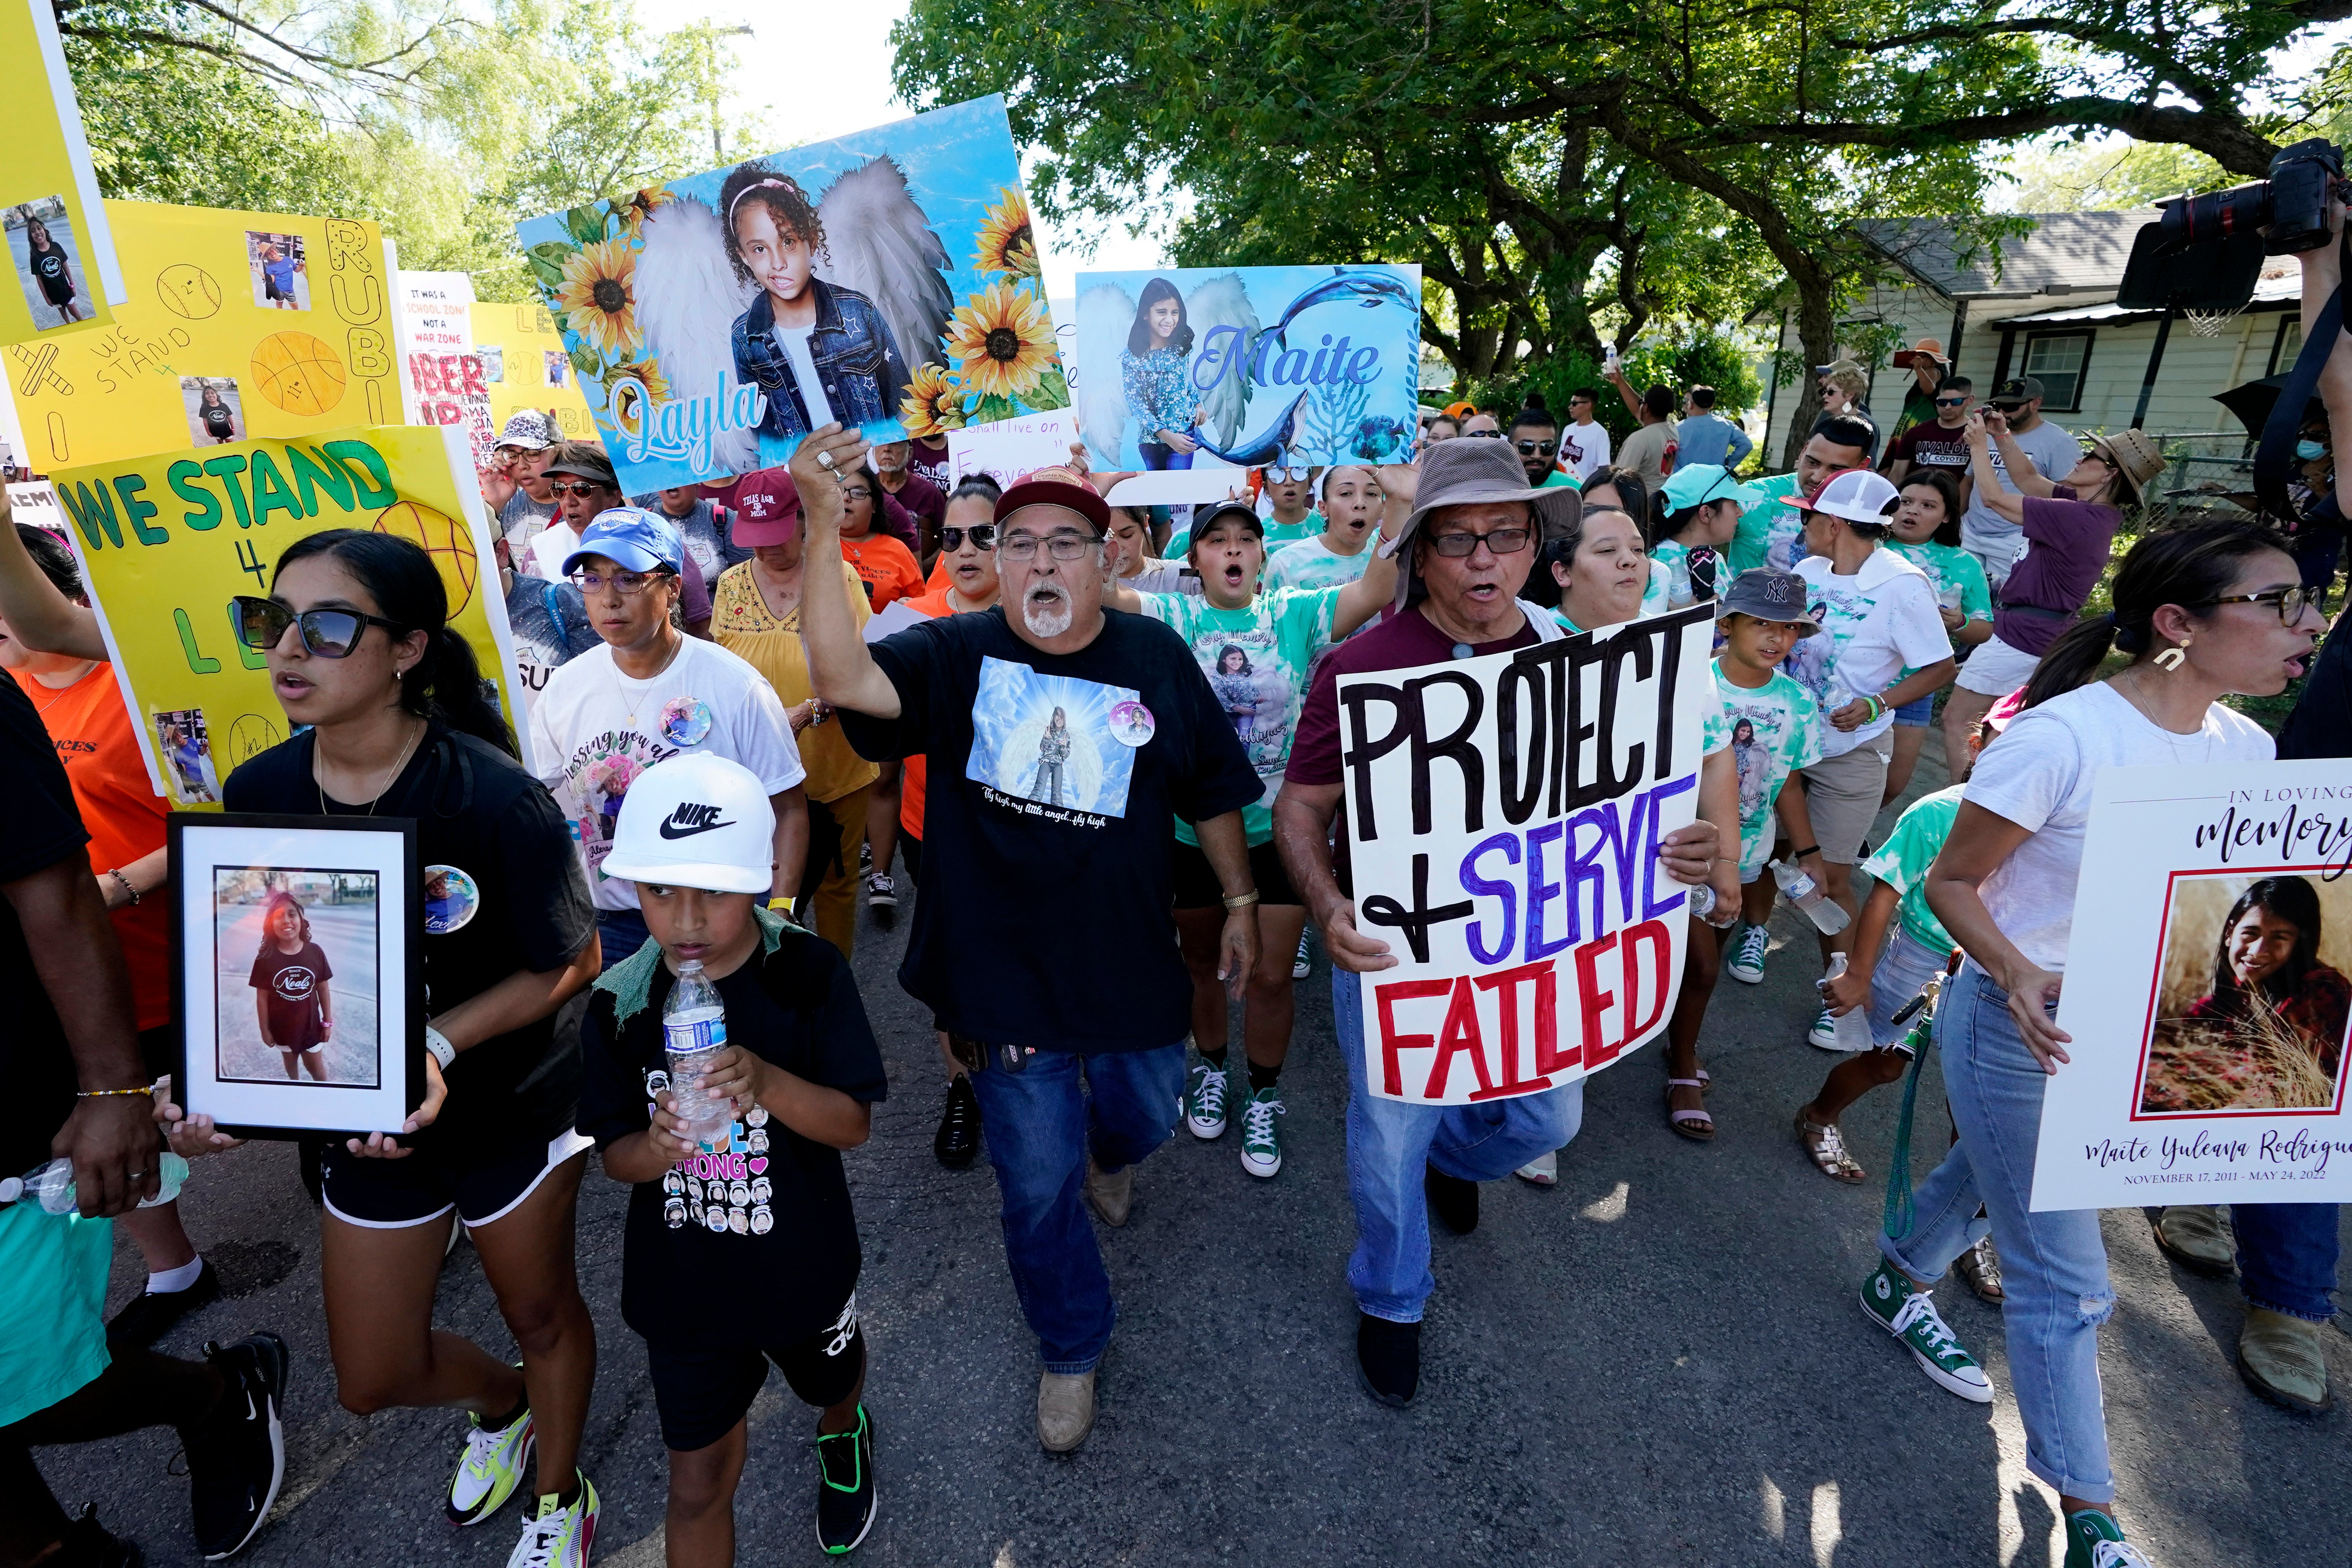 Family and friends of those killed and injured in the school shooting at Robb Elementary take part in a protest march on 11 July